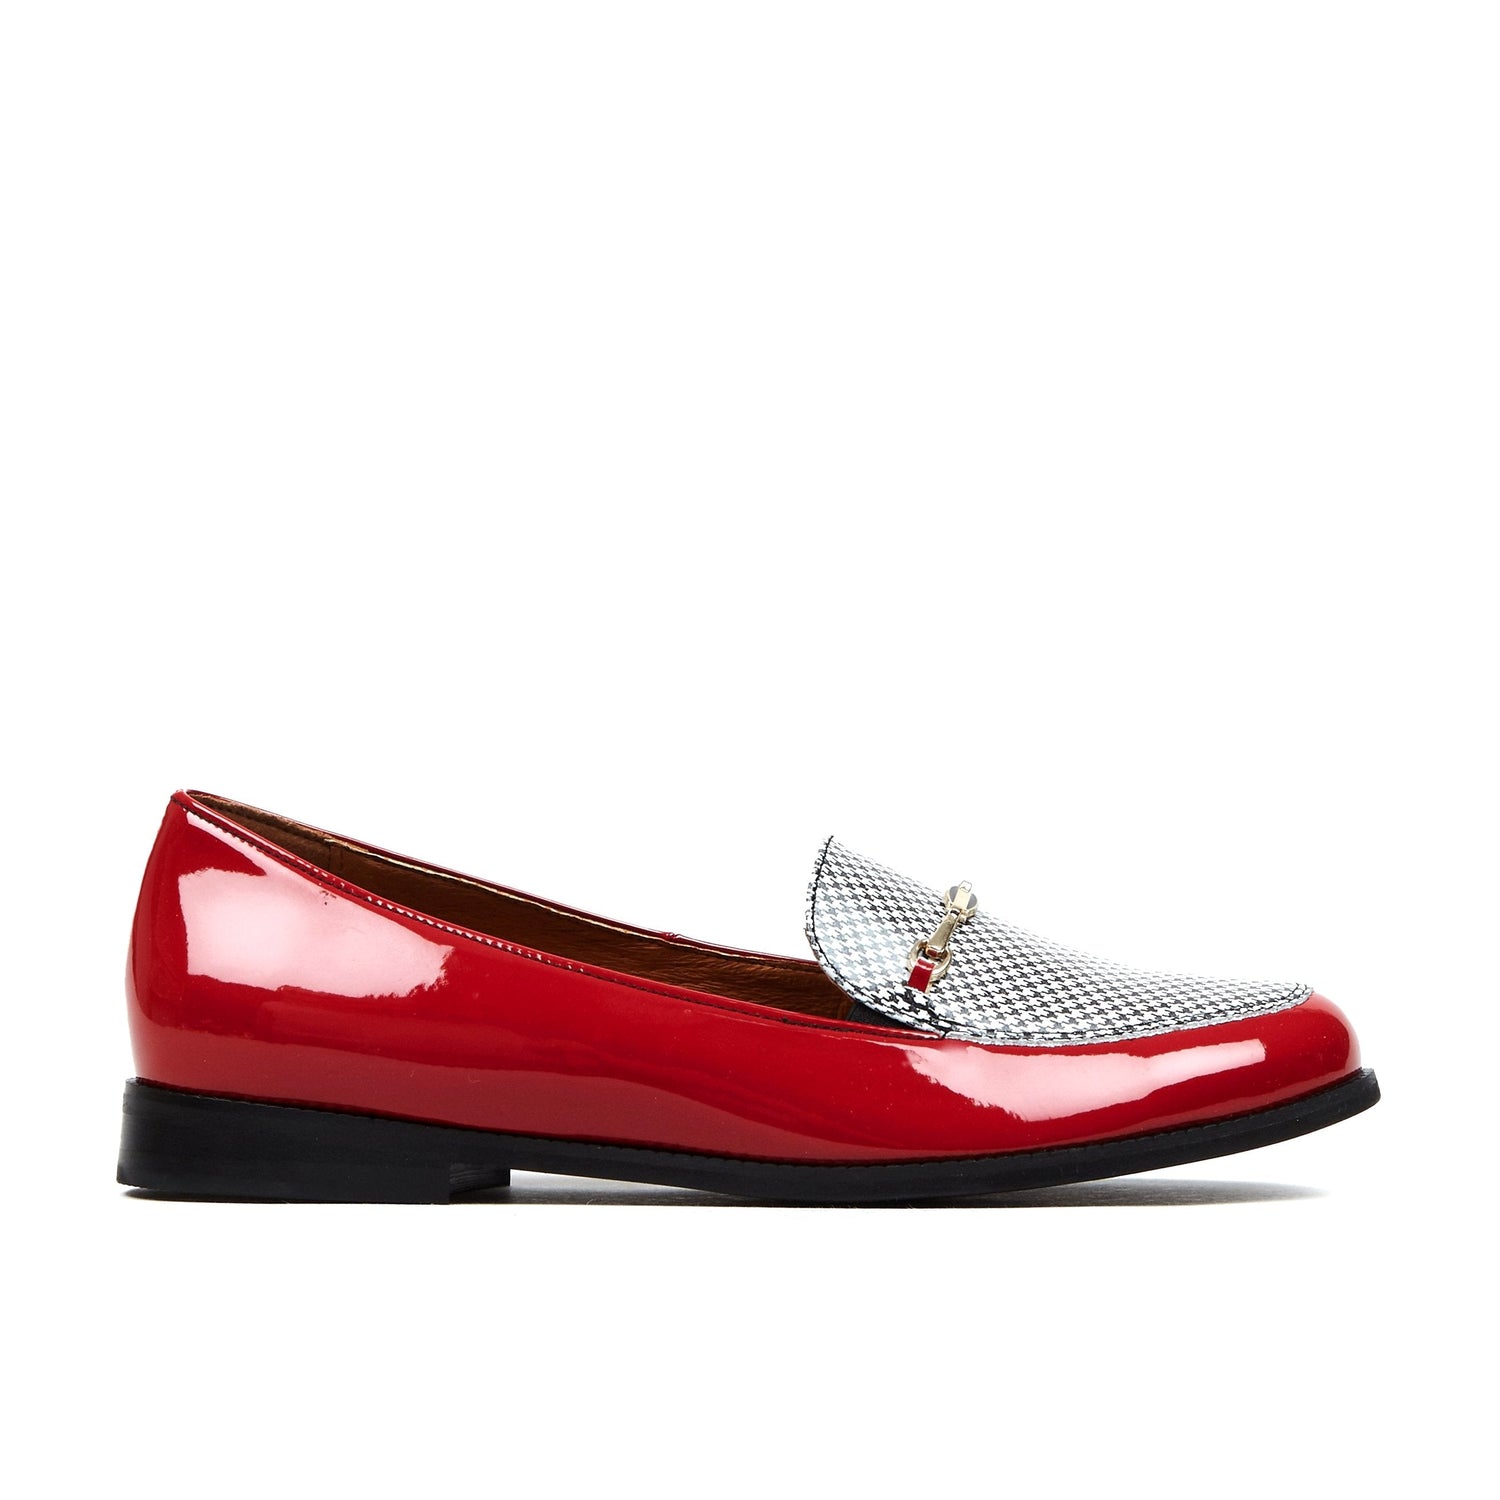 LOUIS VUITTON SHINY RED & BLACK LOAFER 4.5 UK